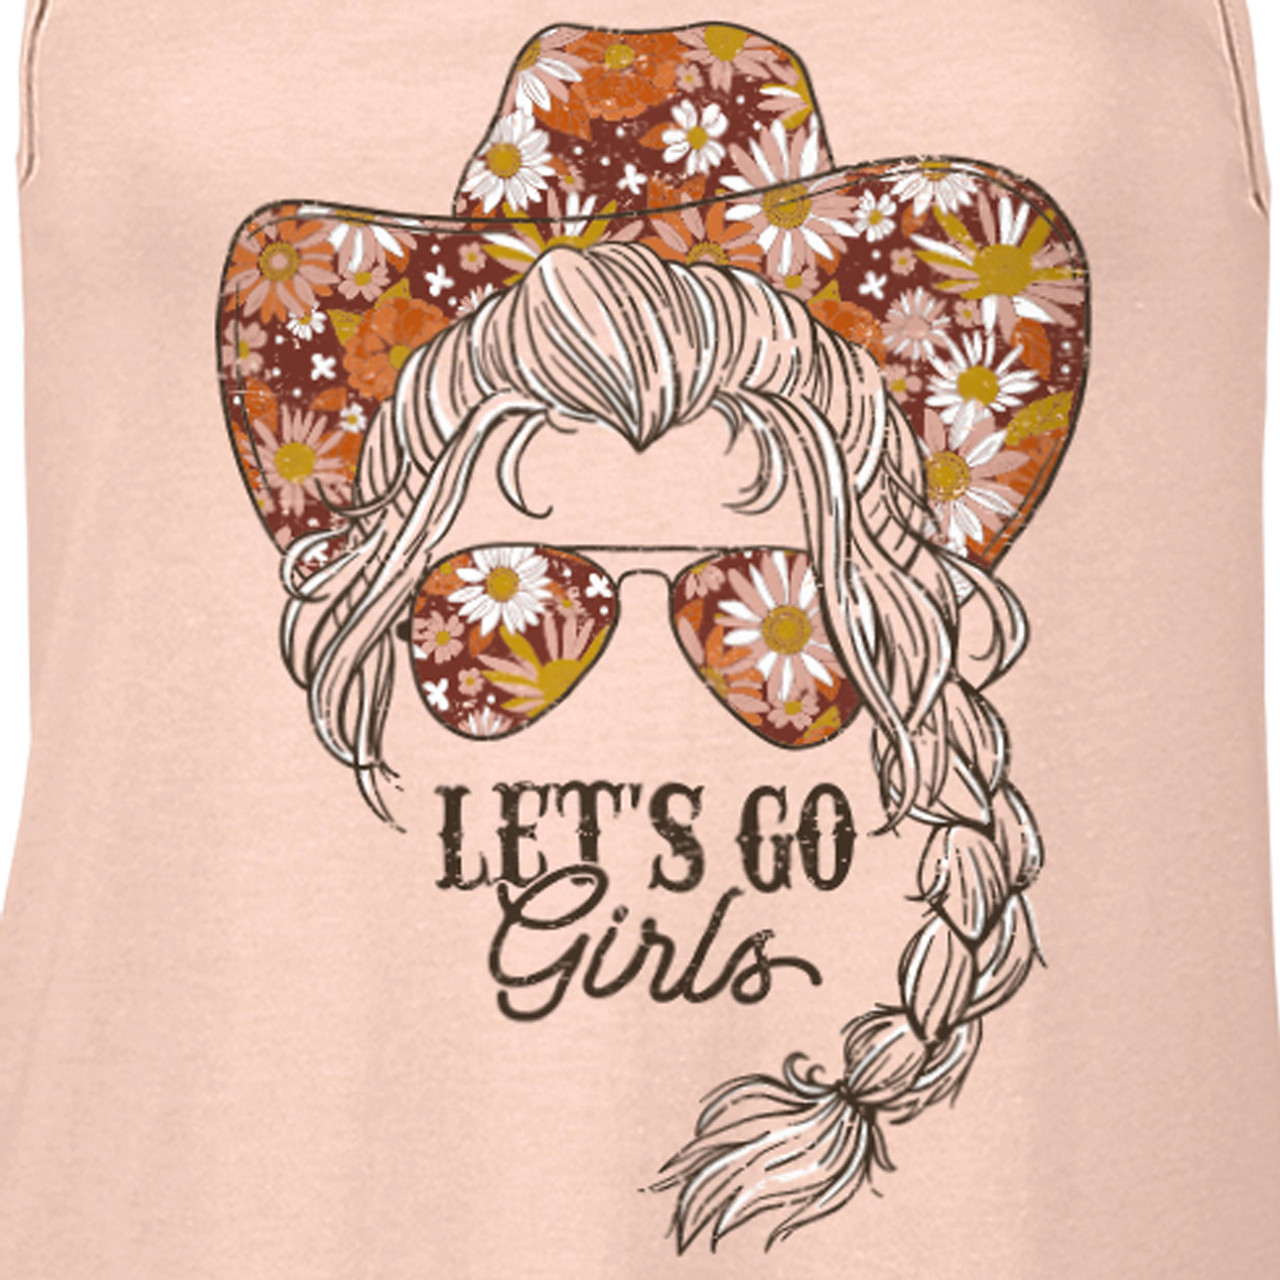 Thread Tank Designs - Let's Go Glamping Women's Relaxed T-Shirt Tee